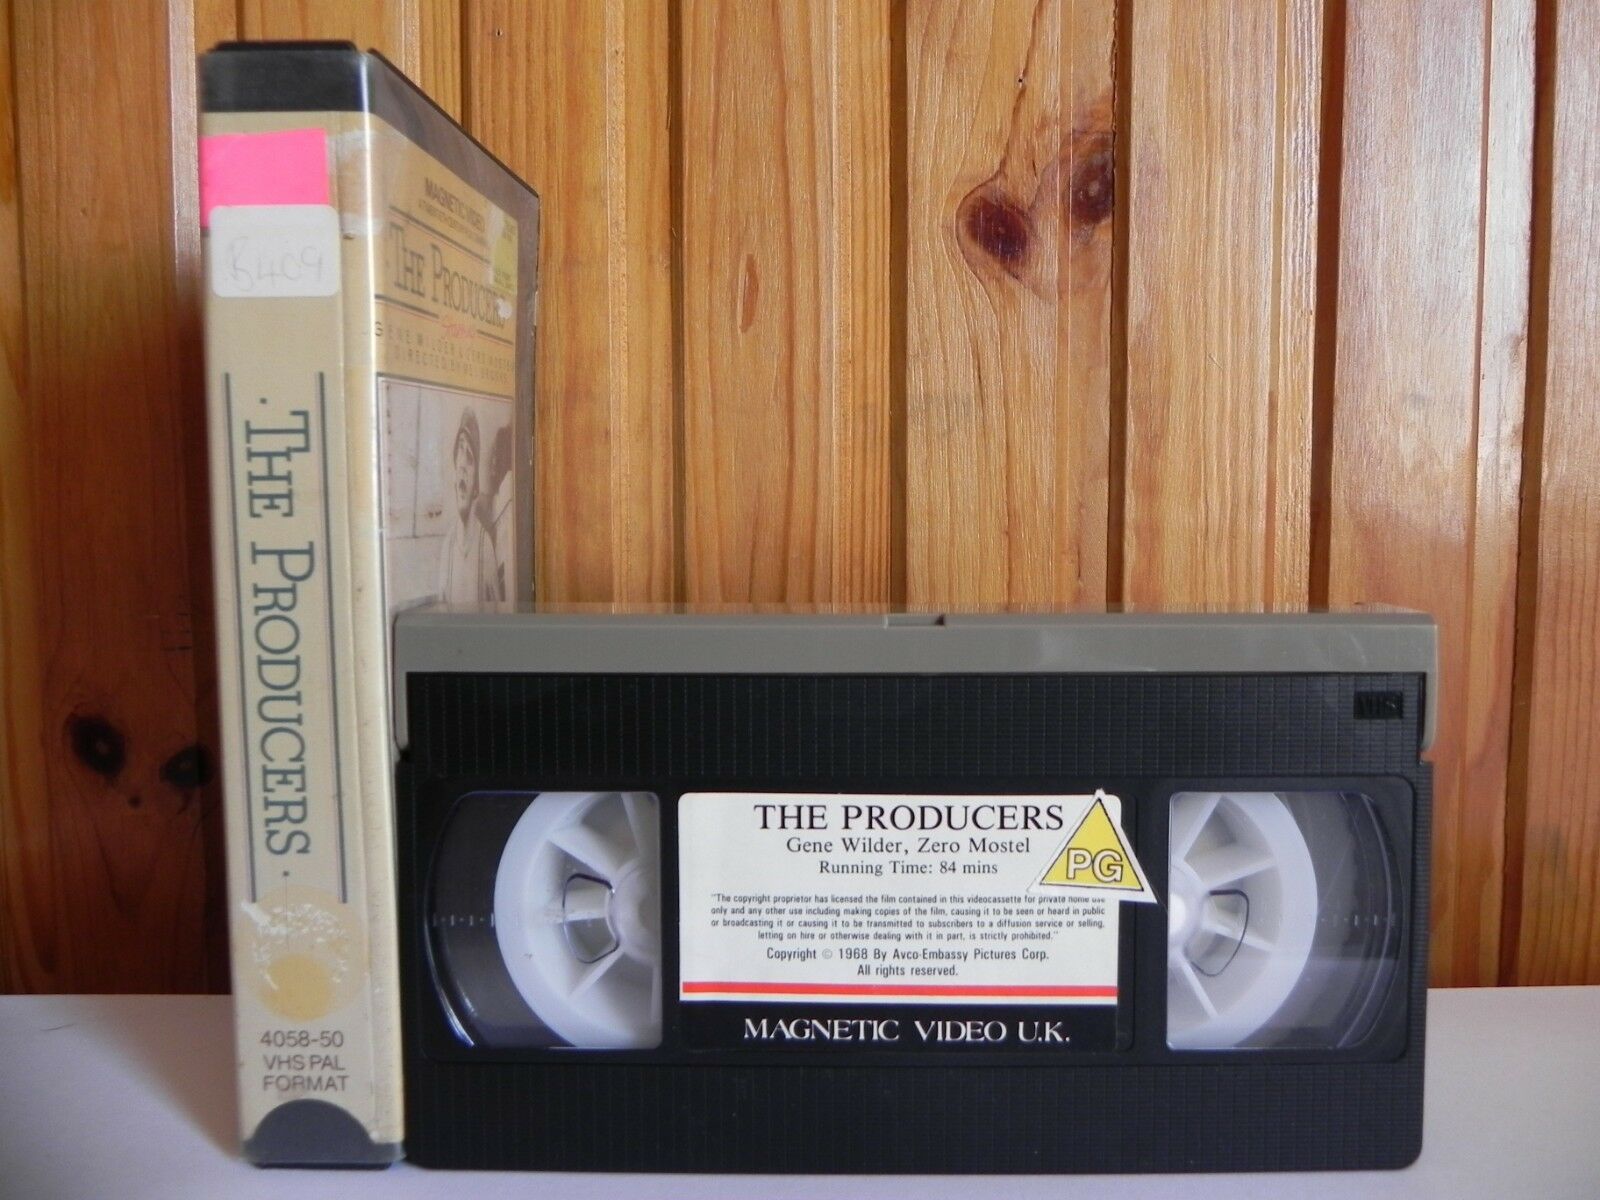 The Producers - Magnetic Video - Comedy - Pre-cert - Gene Wilder - Pal VHS-